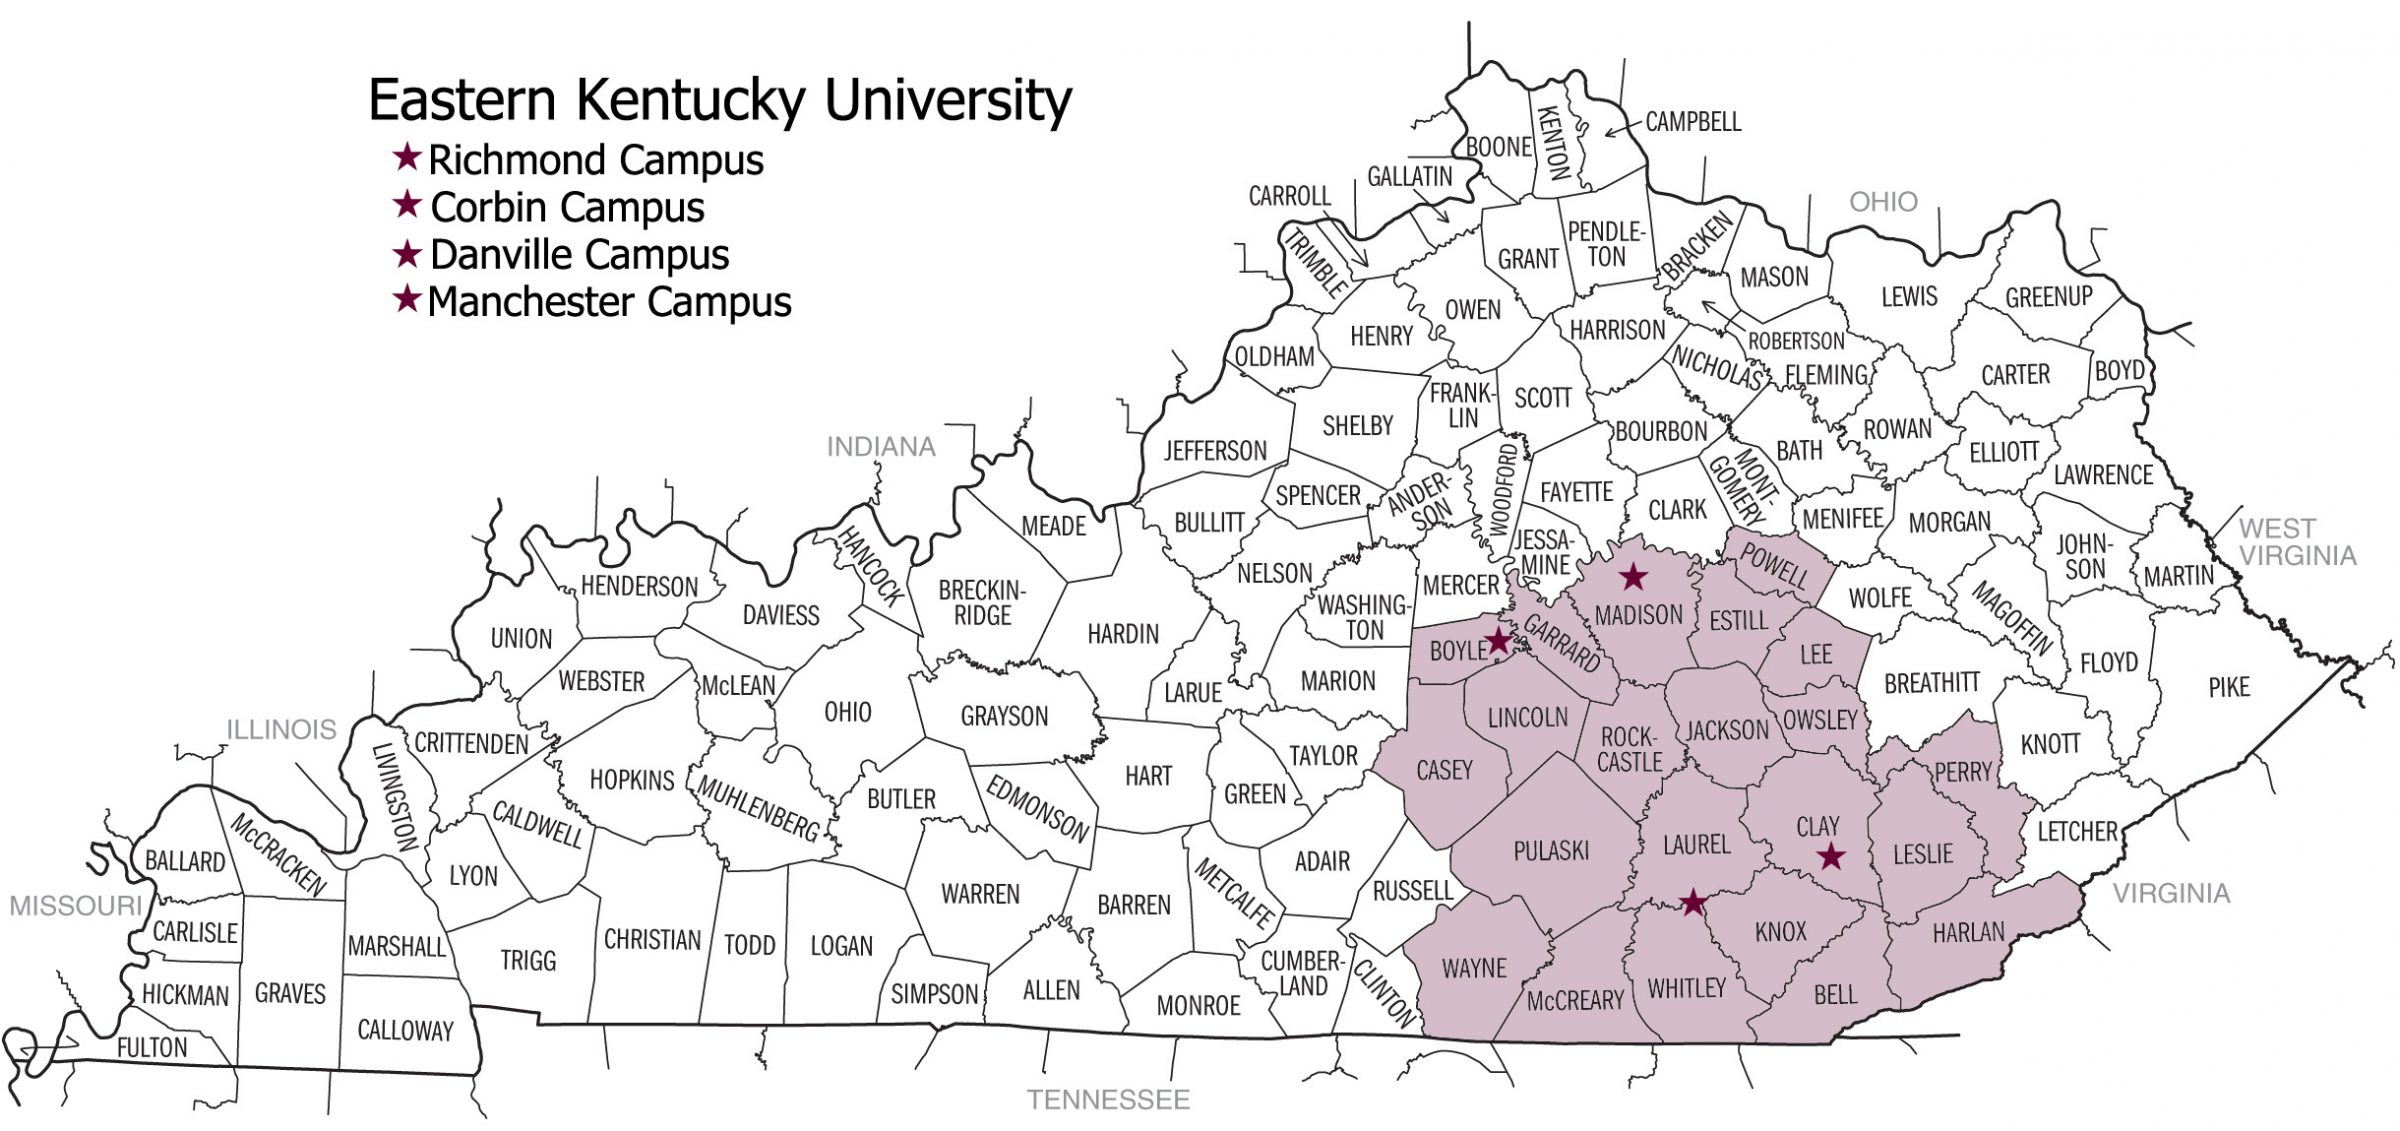 A map of Kentucky with EKU's service regions highlighted.